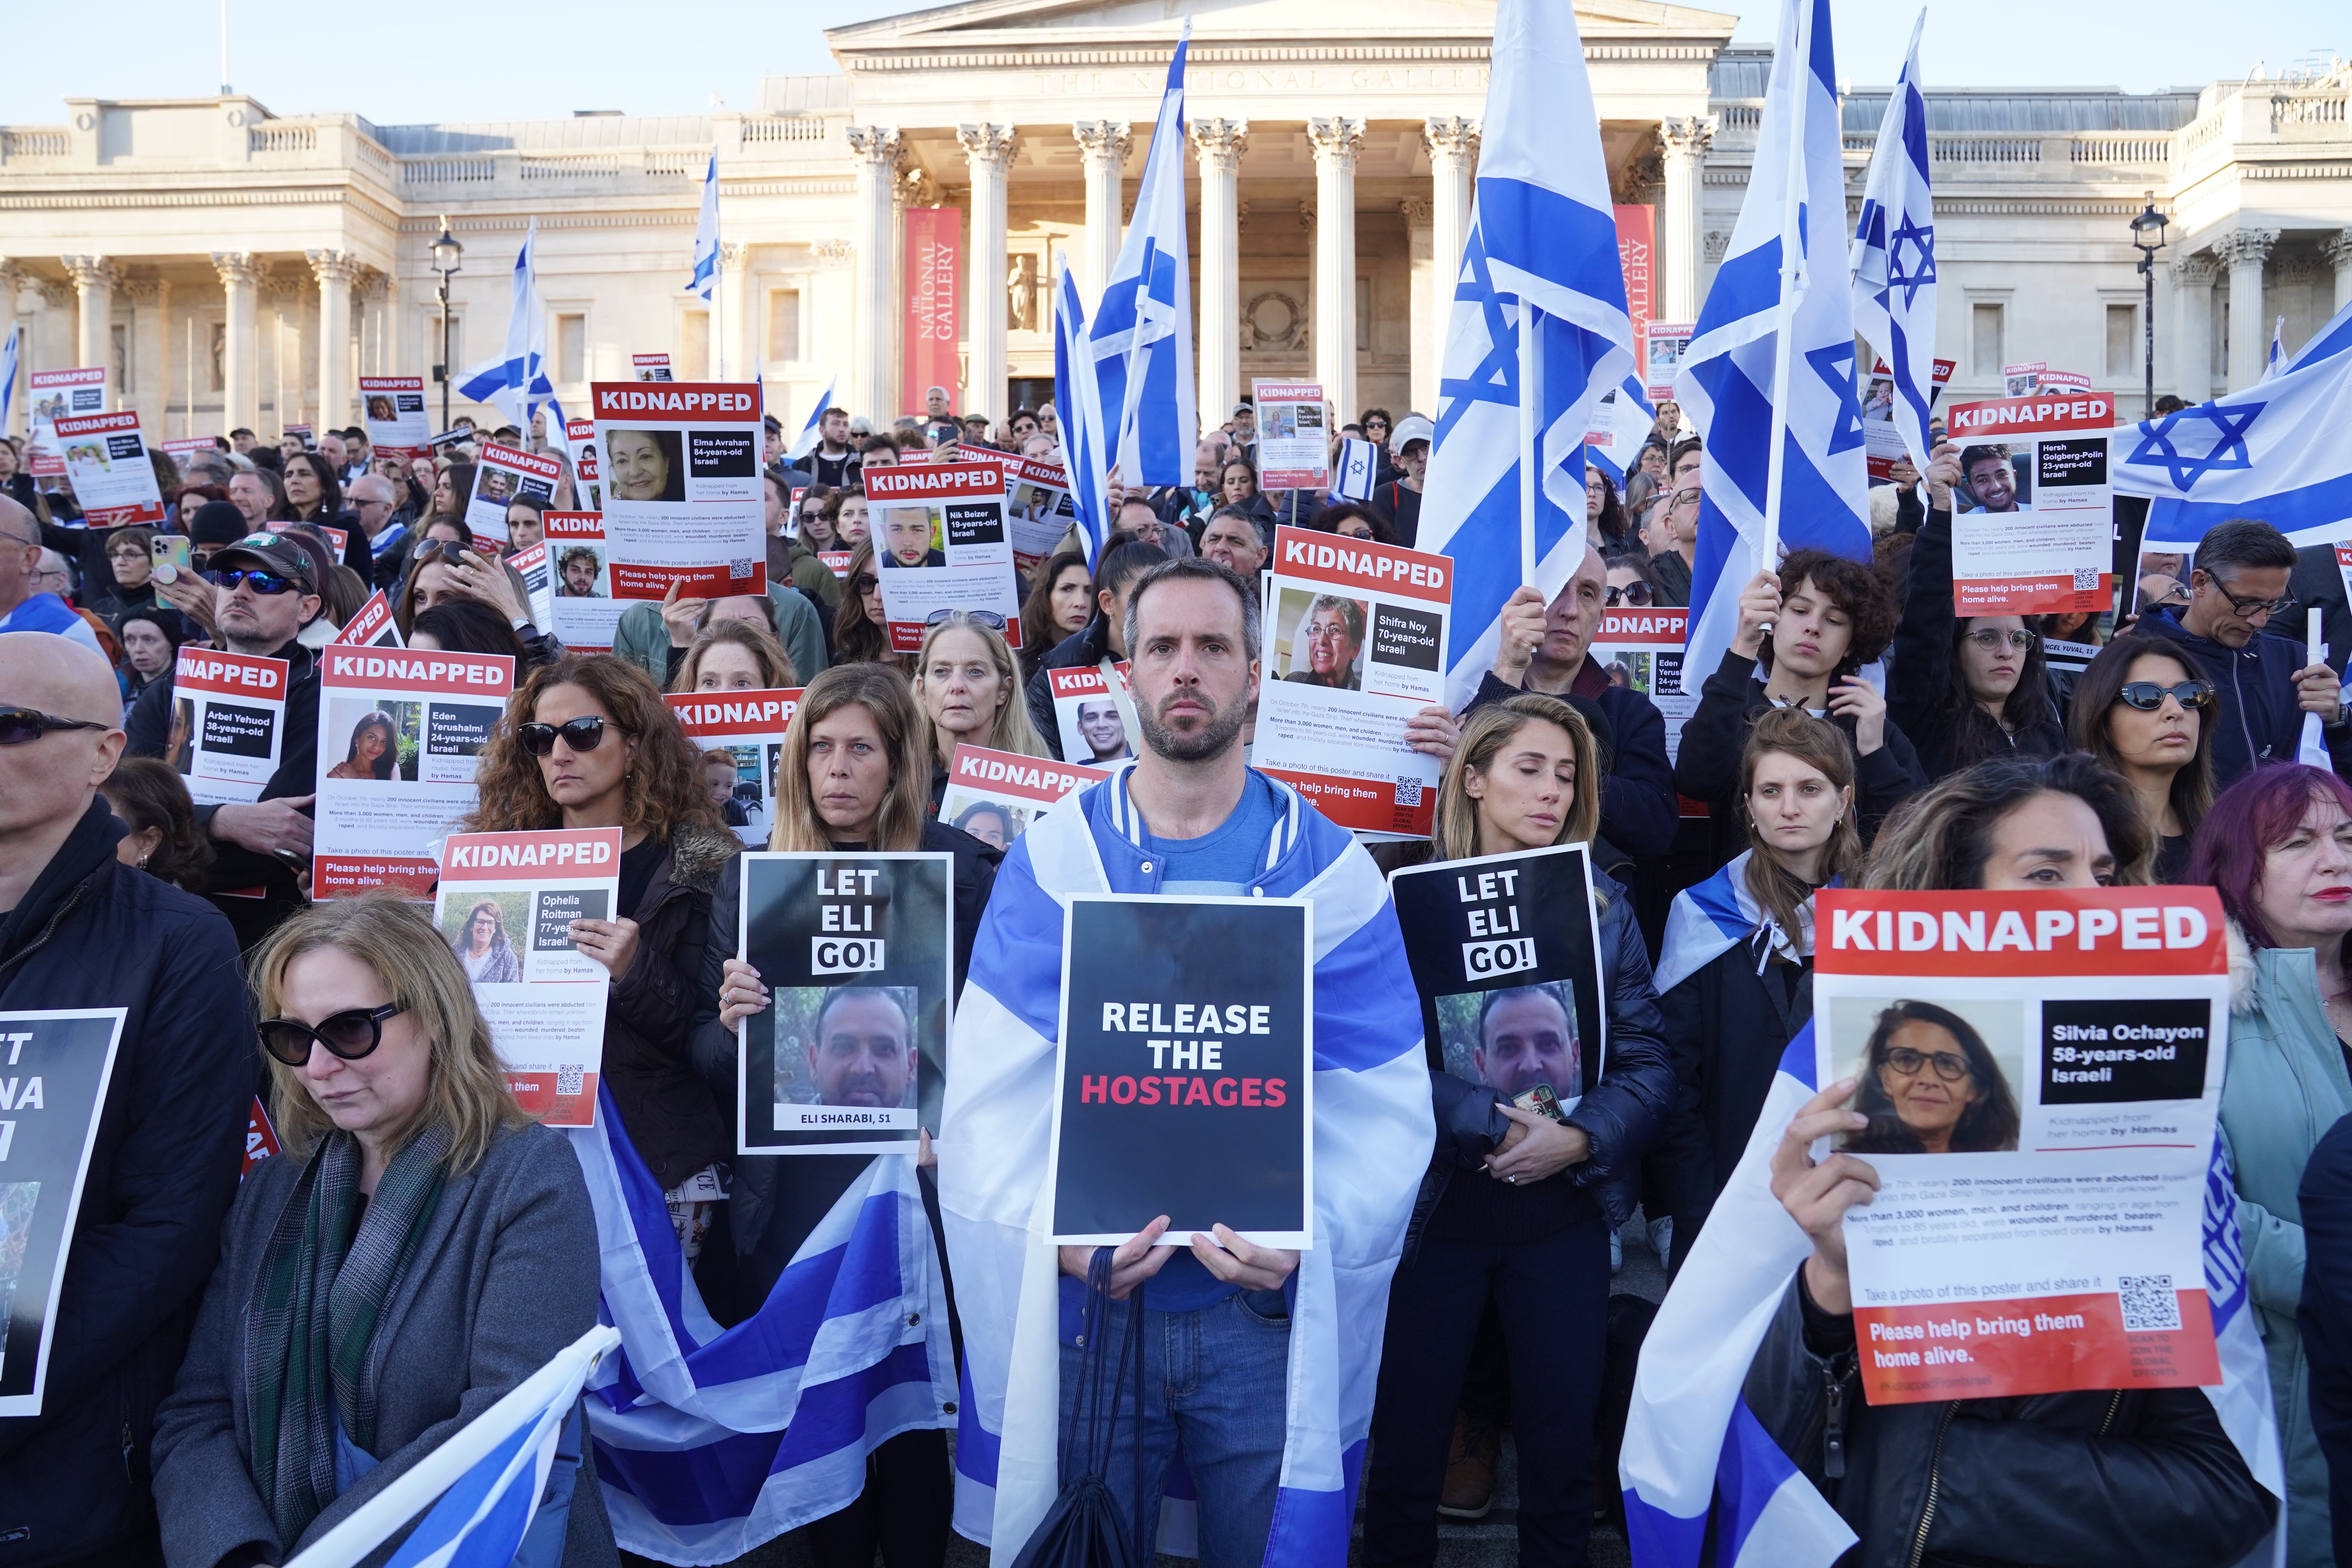 Members of the Jewish community attend a Solidarity Rally in Trafalgar Square, London, calling for the safe return of hostages